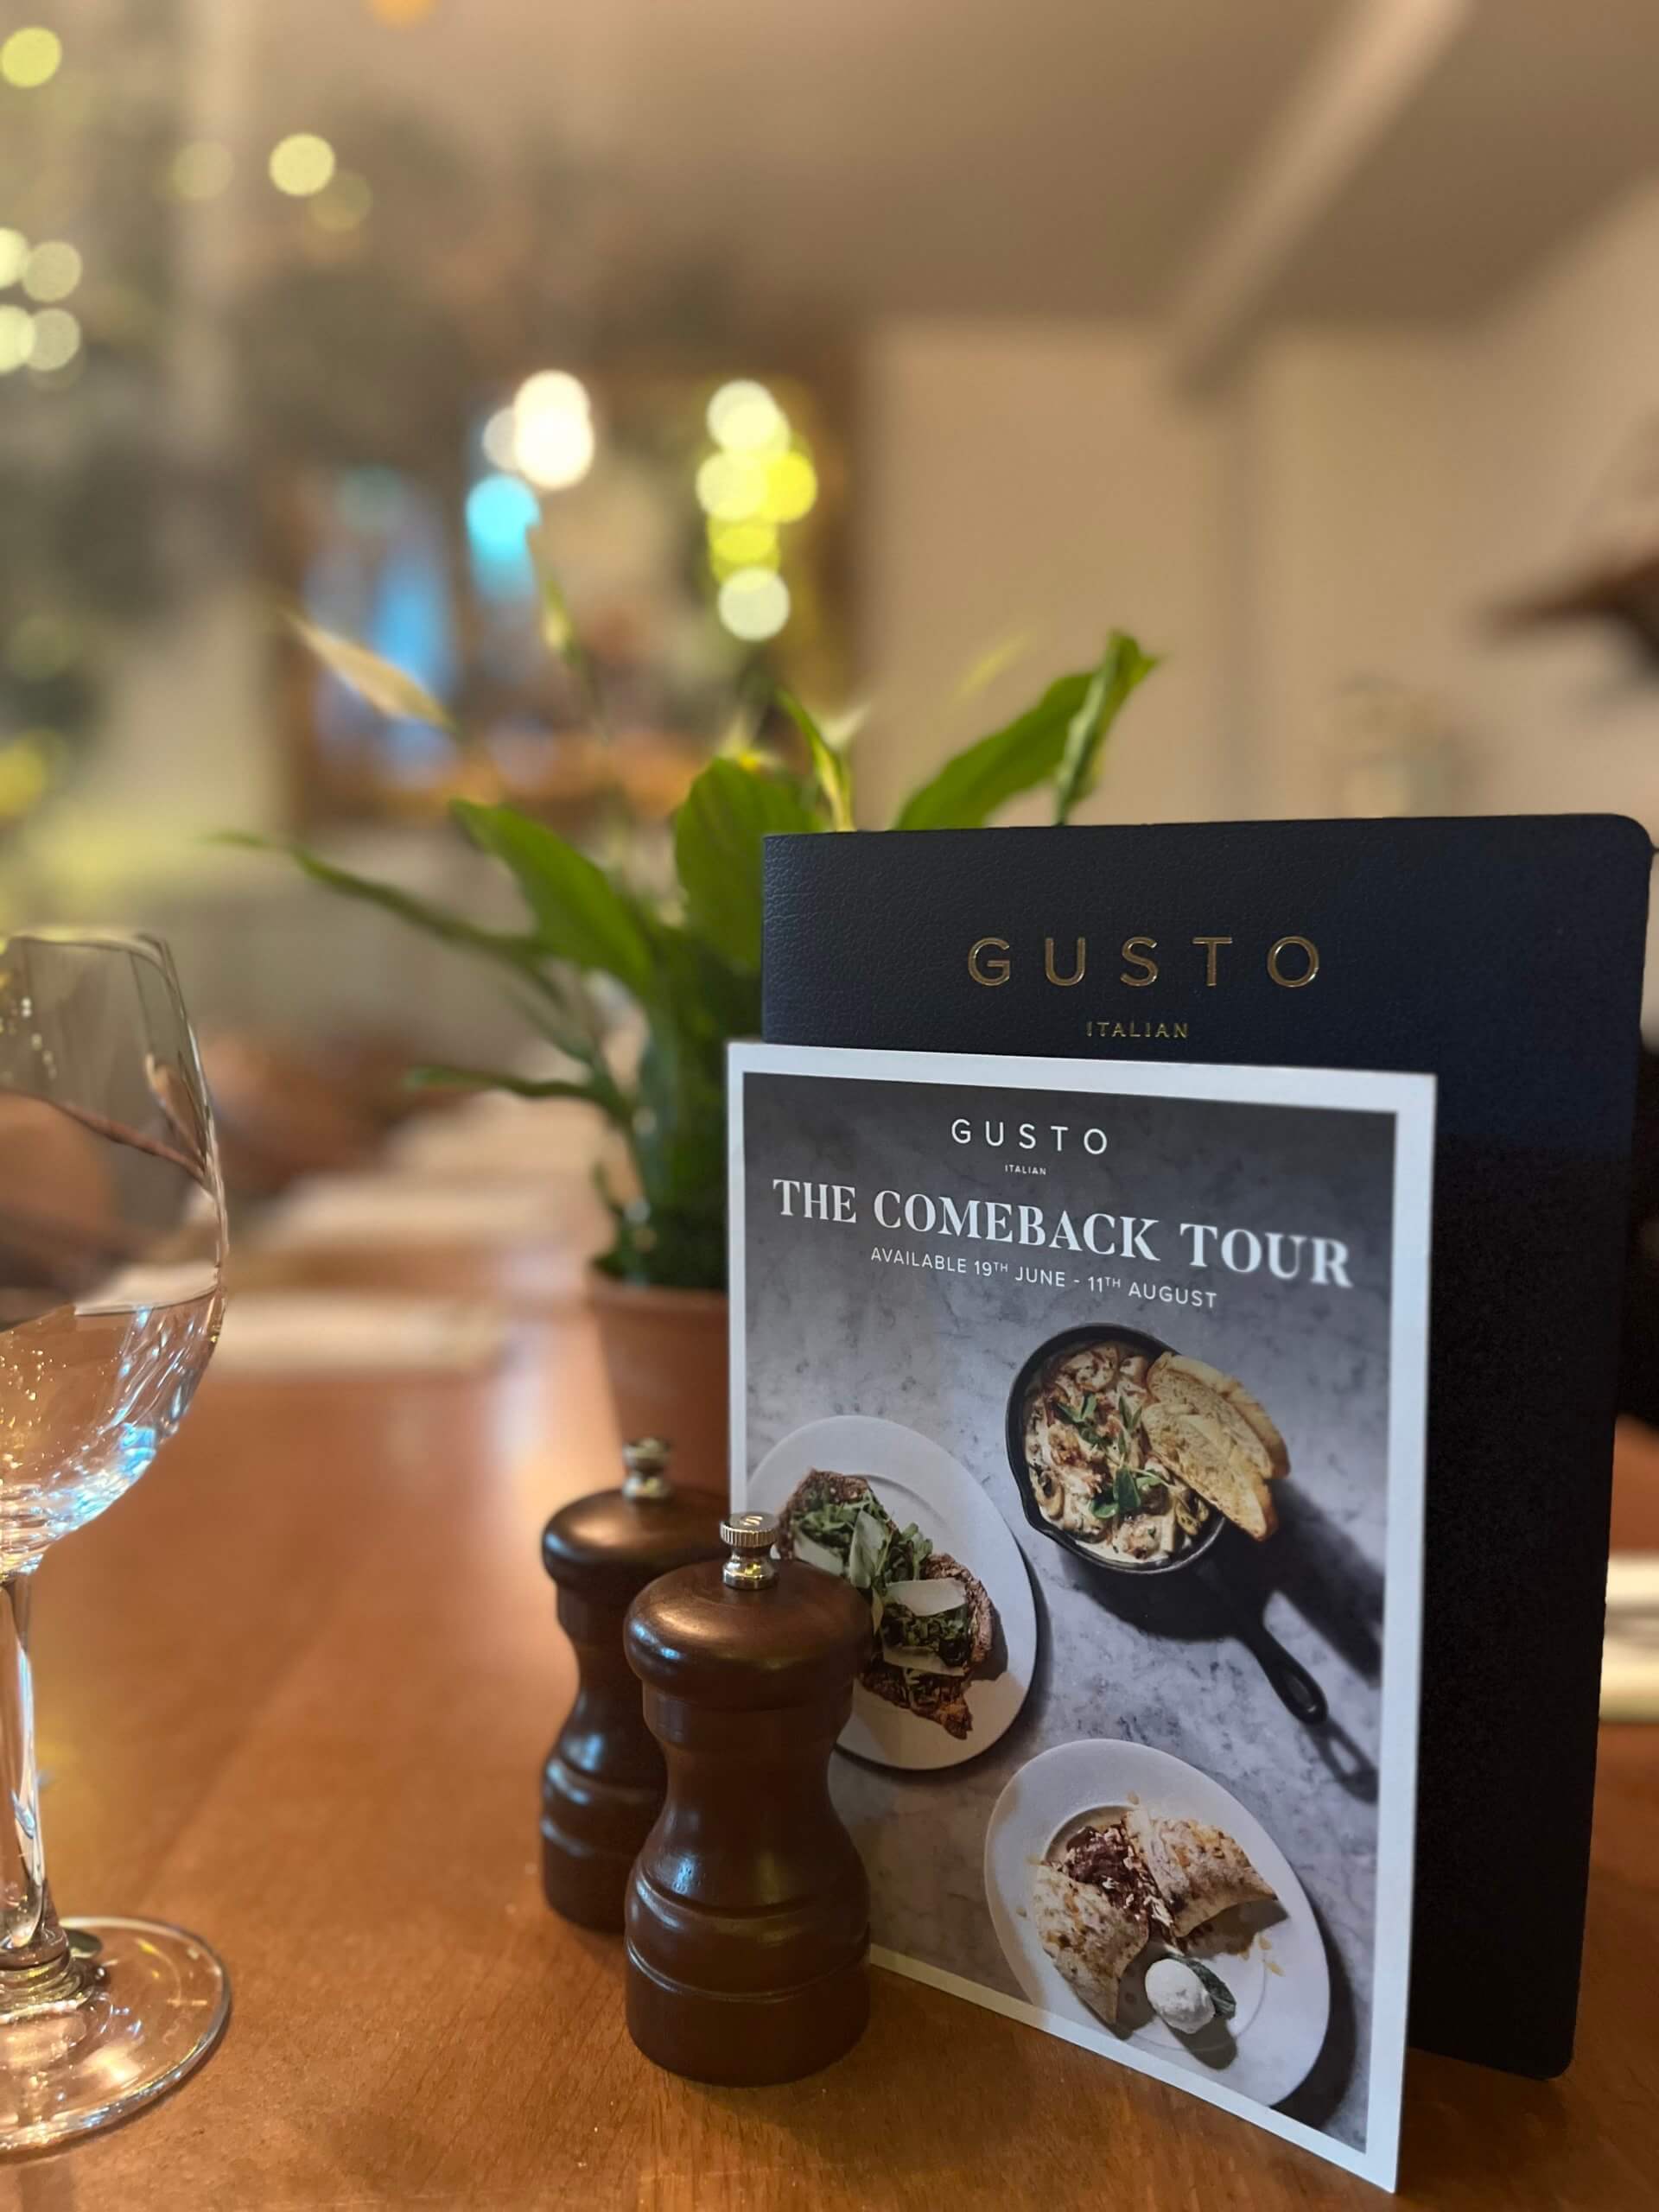 Network Knutsford & Dine: An Evening at Gusto